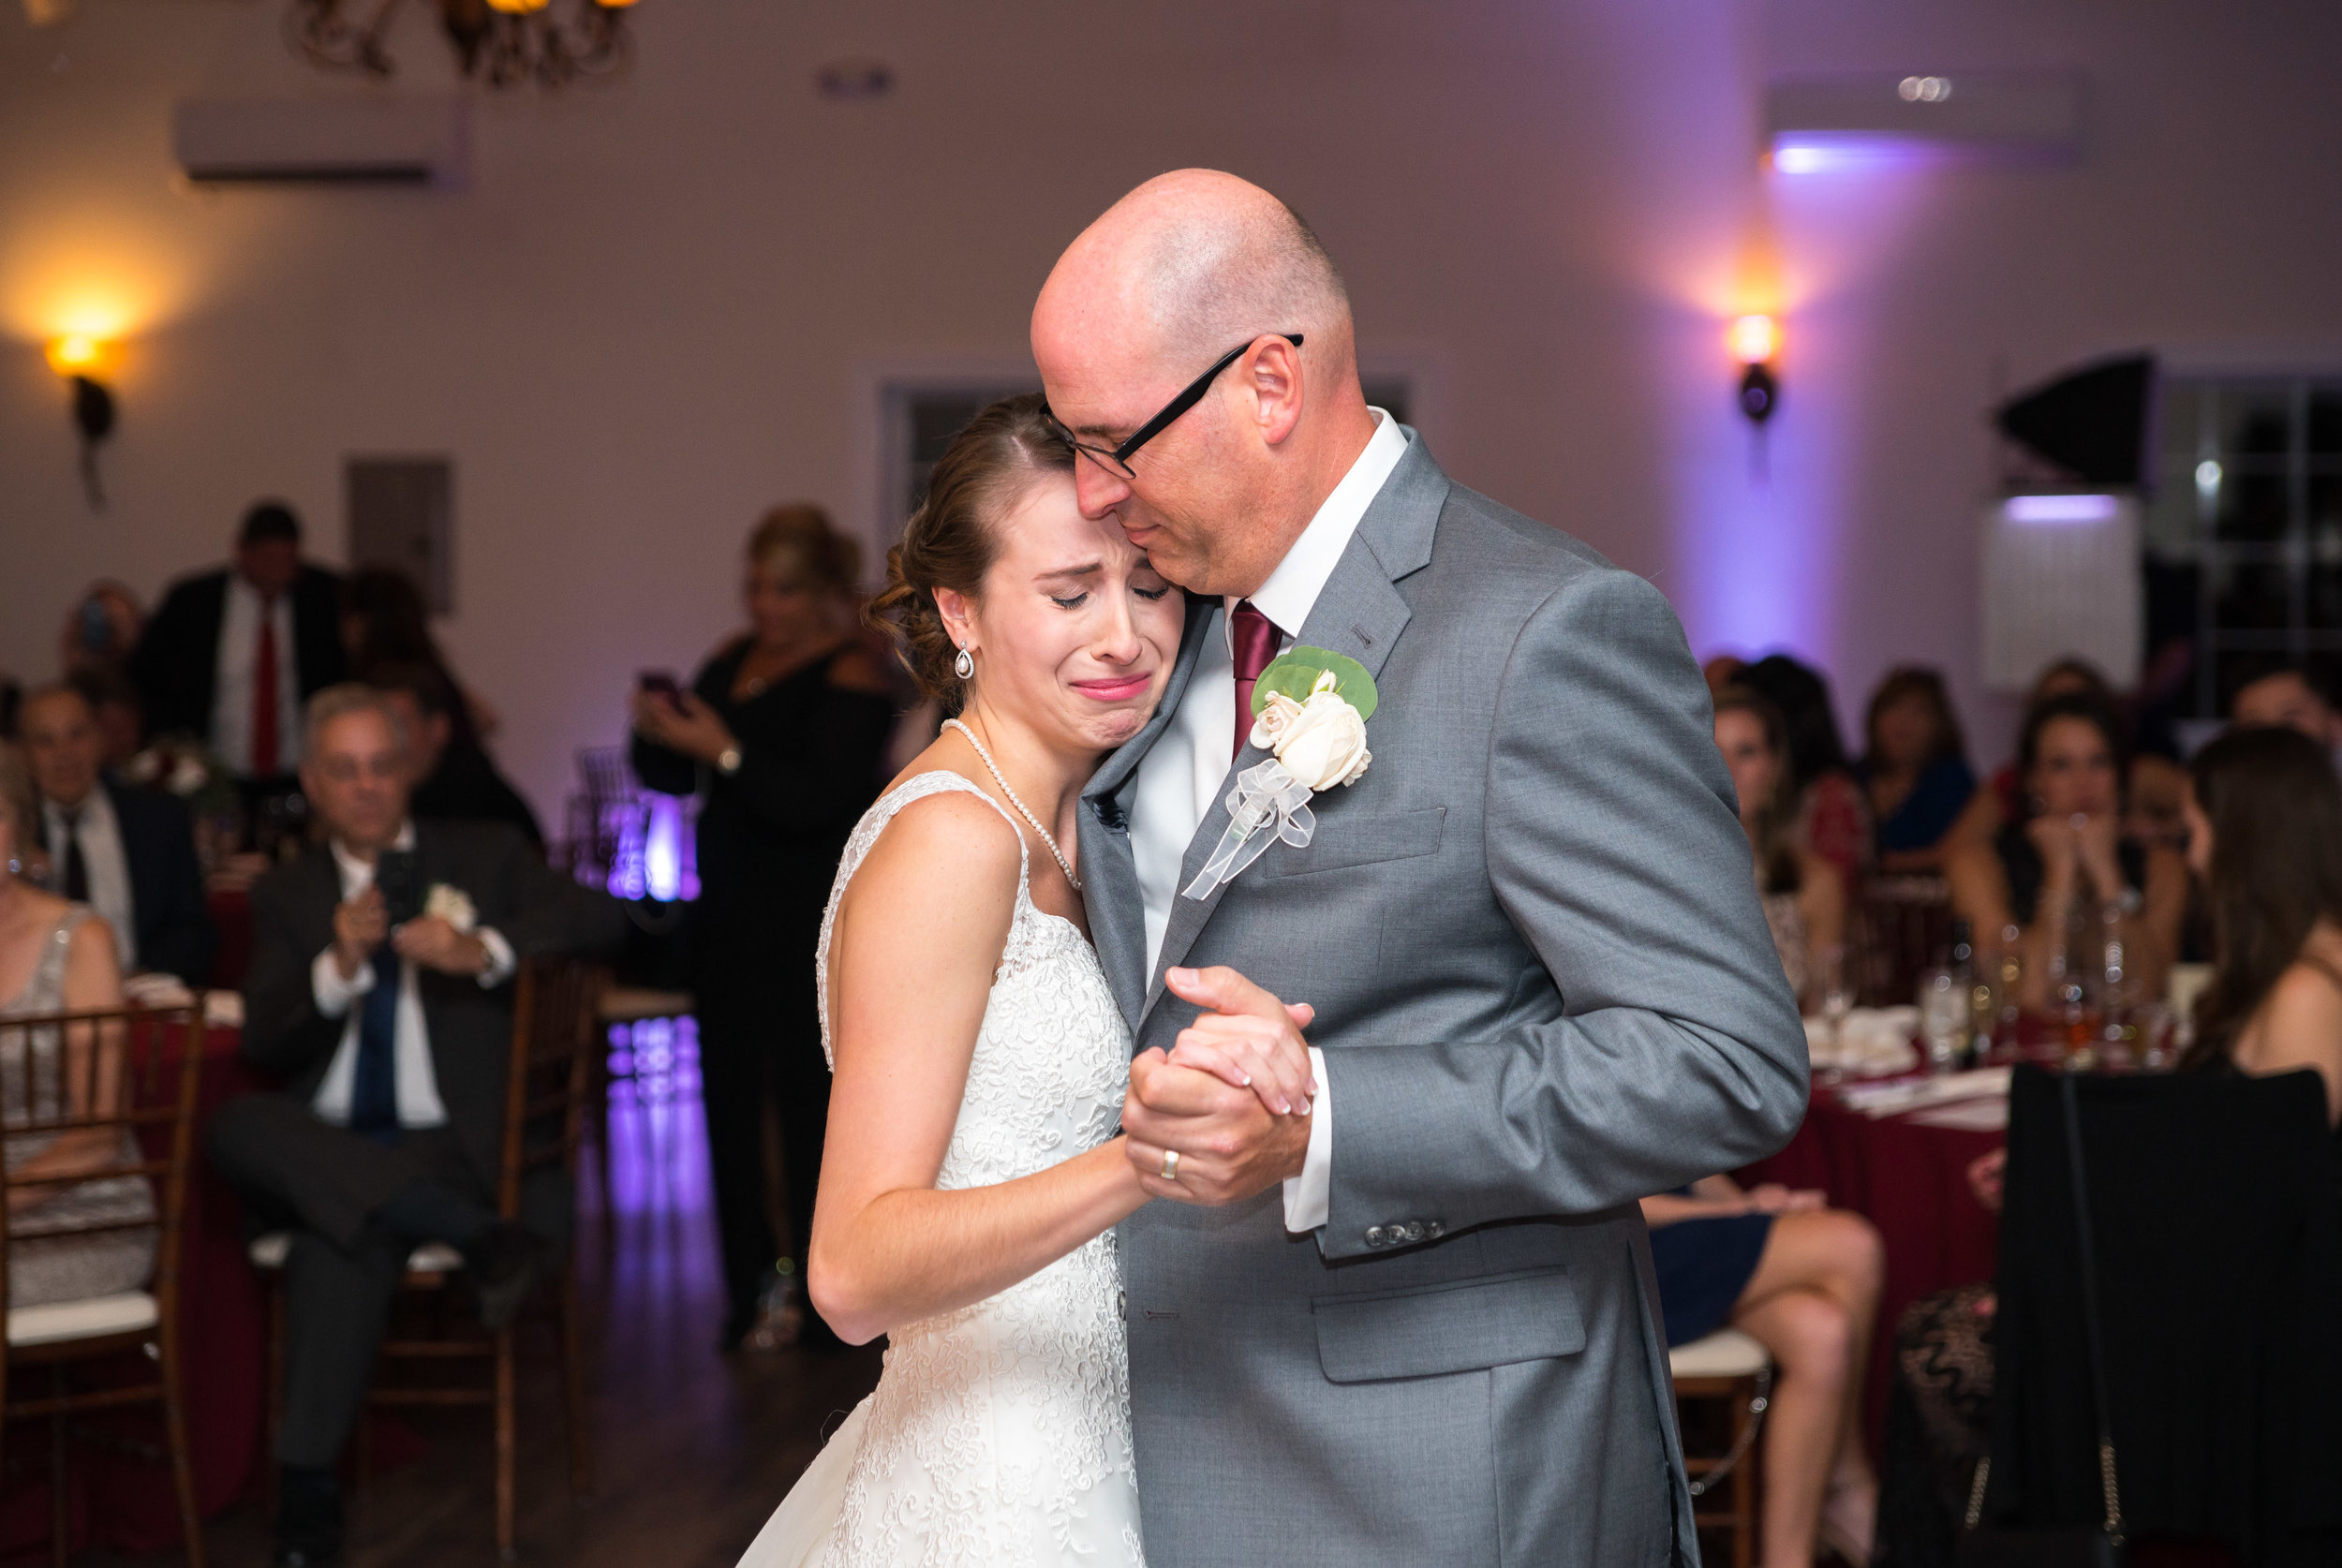 Emotional Father daughter dance at the wedding reception